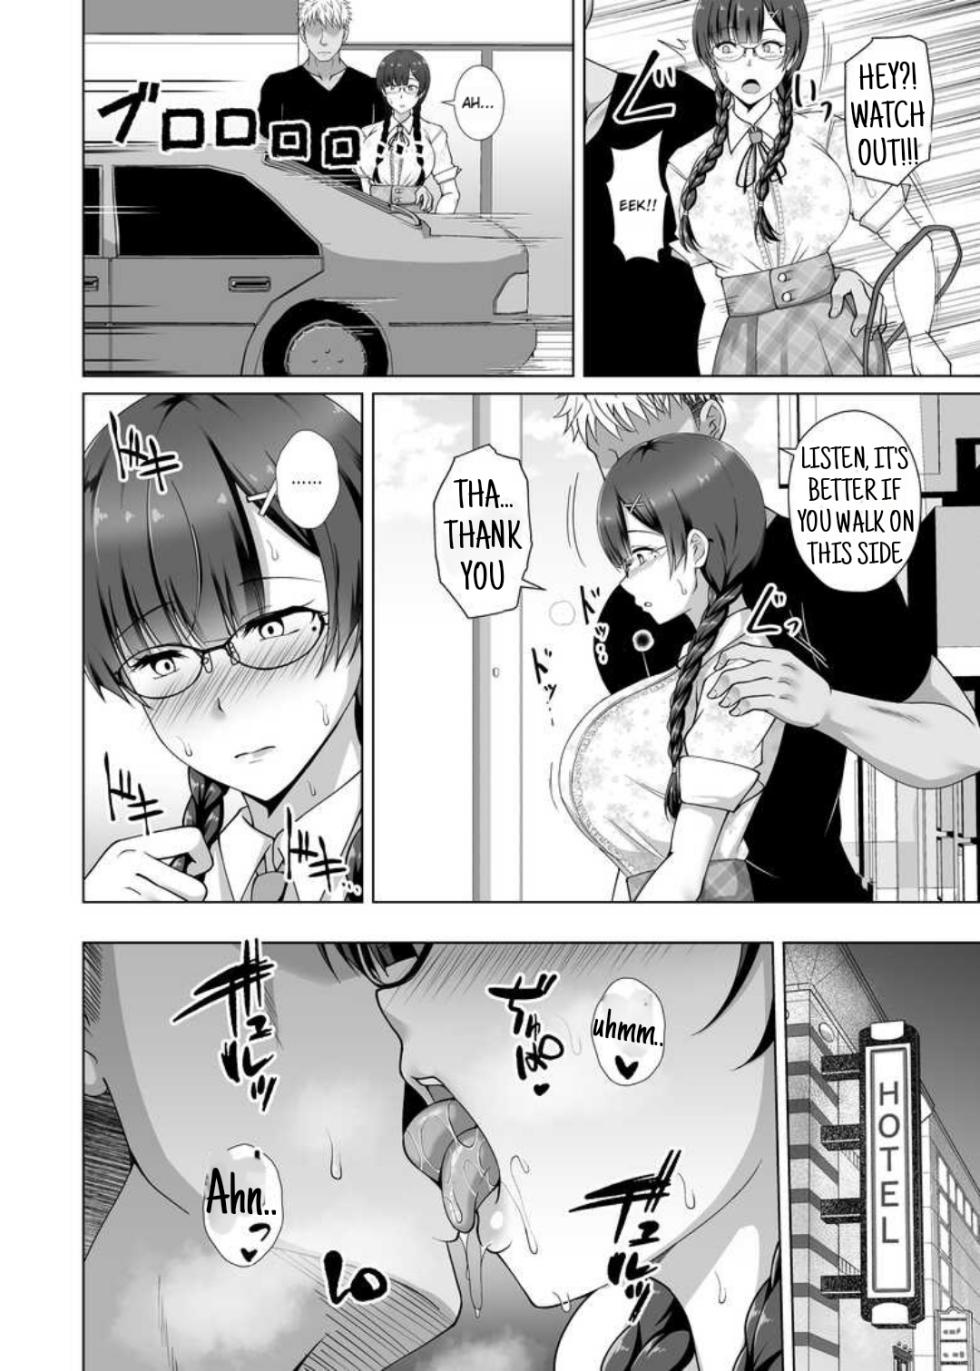 [Taishou Romanesque (Toono Suika)] Why she took off her glasses ~The Unrequited Love of the Class President with Huge Tits who allowed herself to be Manipulated by her Boyfriend~ [NekoCreme] [Digital] - Page 24